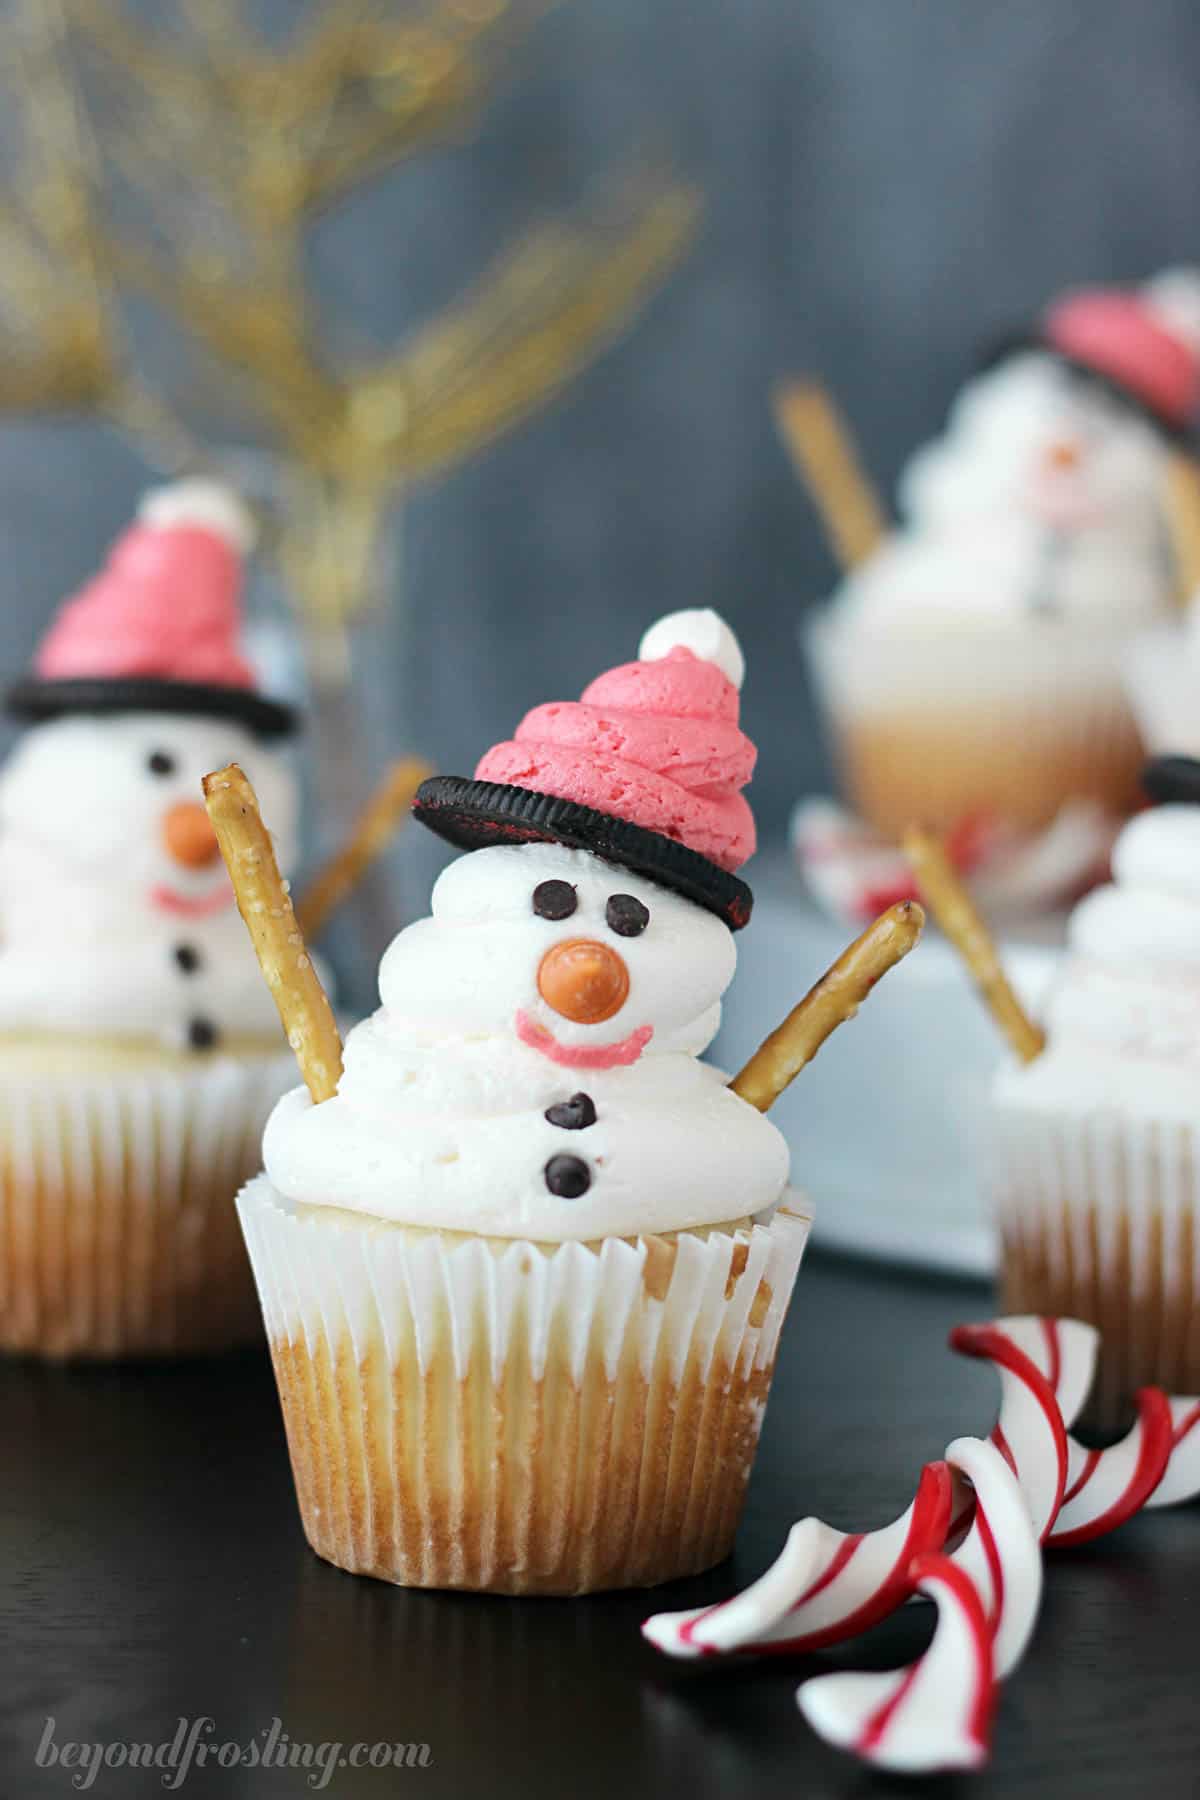 front view of a snowman cupcake with more cupcakes in the background